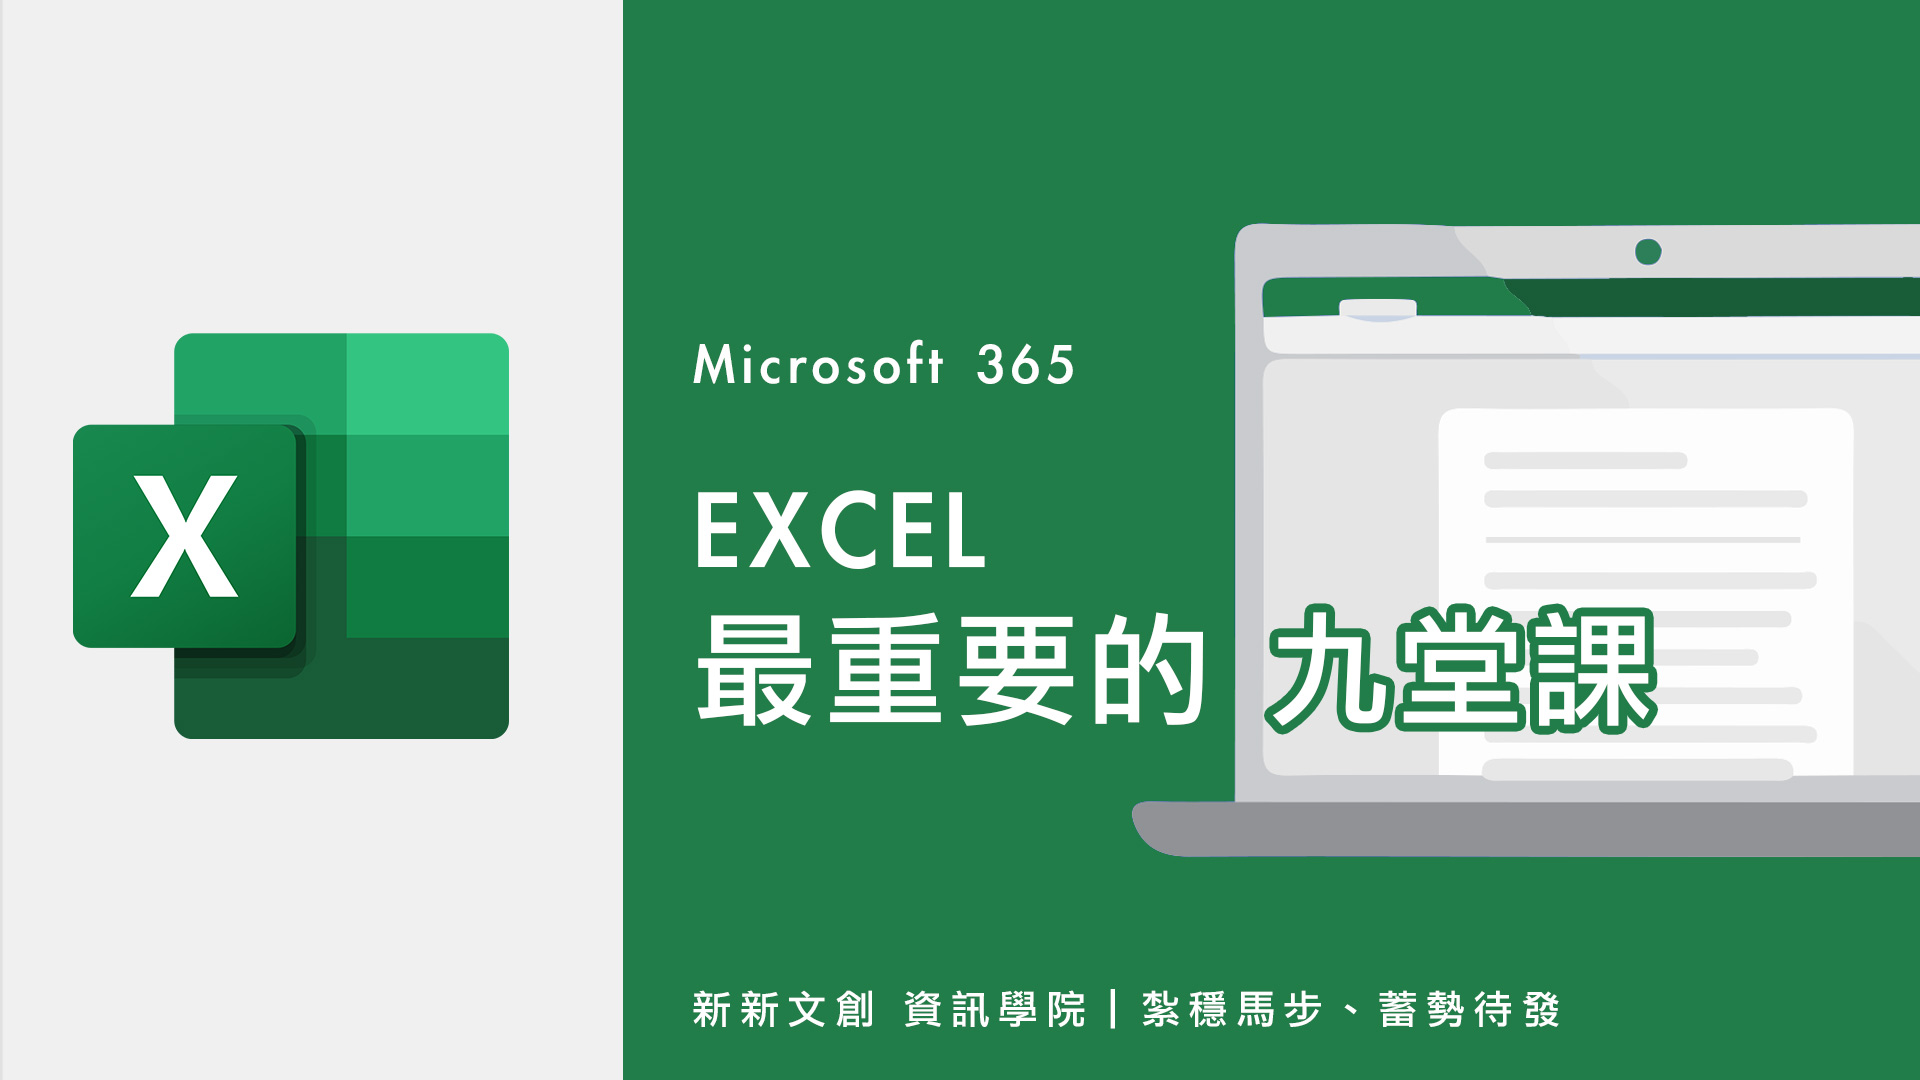 Microsoft 365 Excel Office365